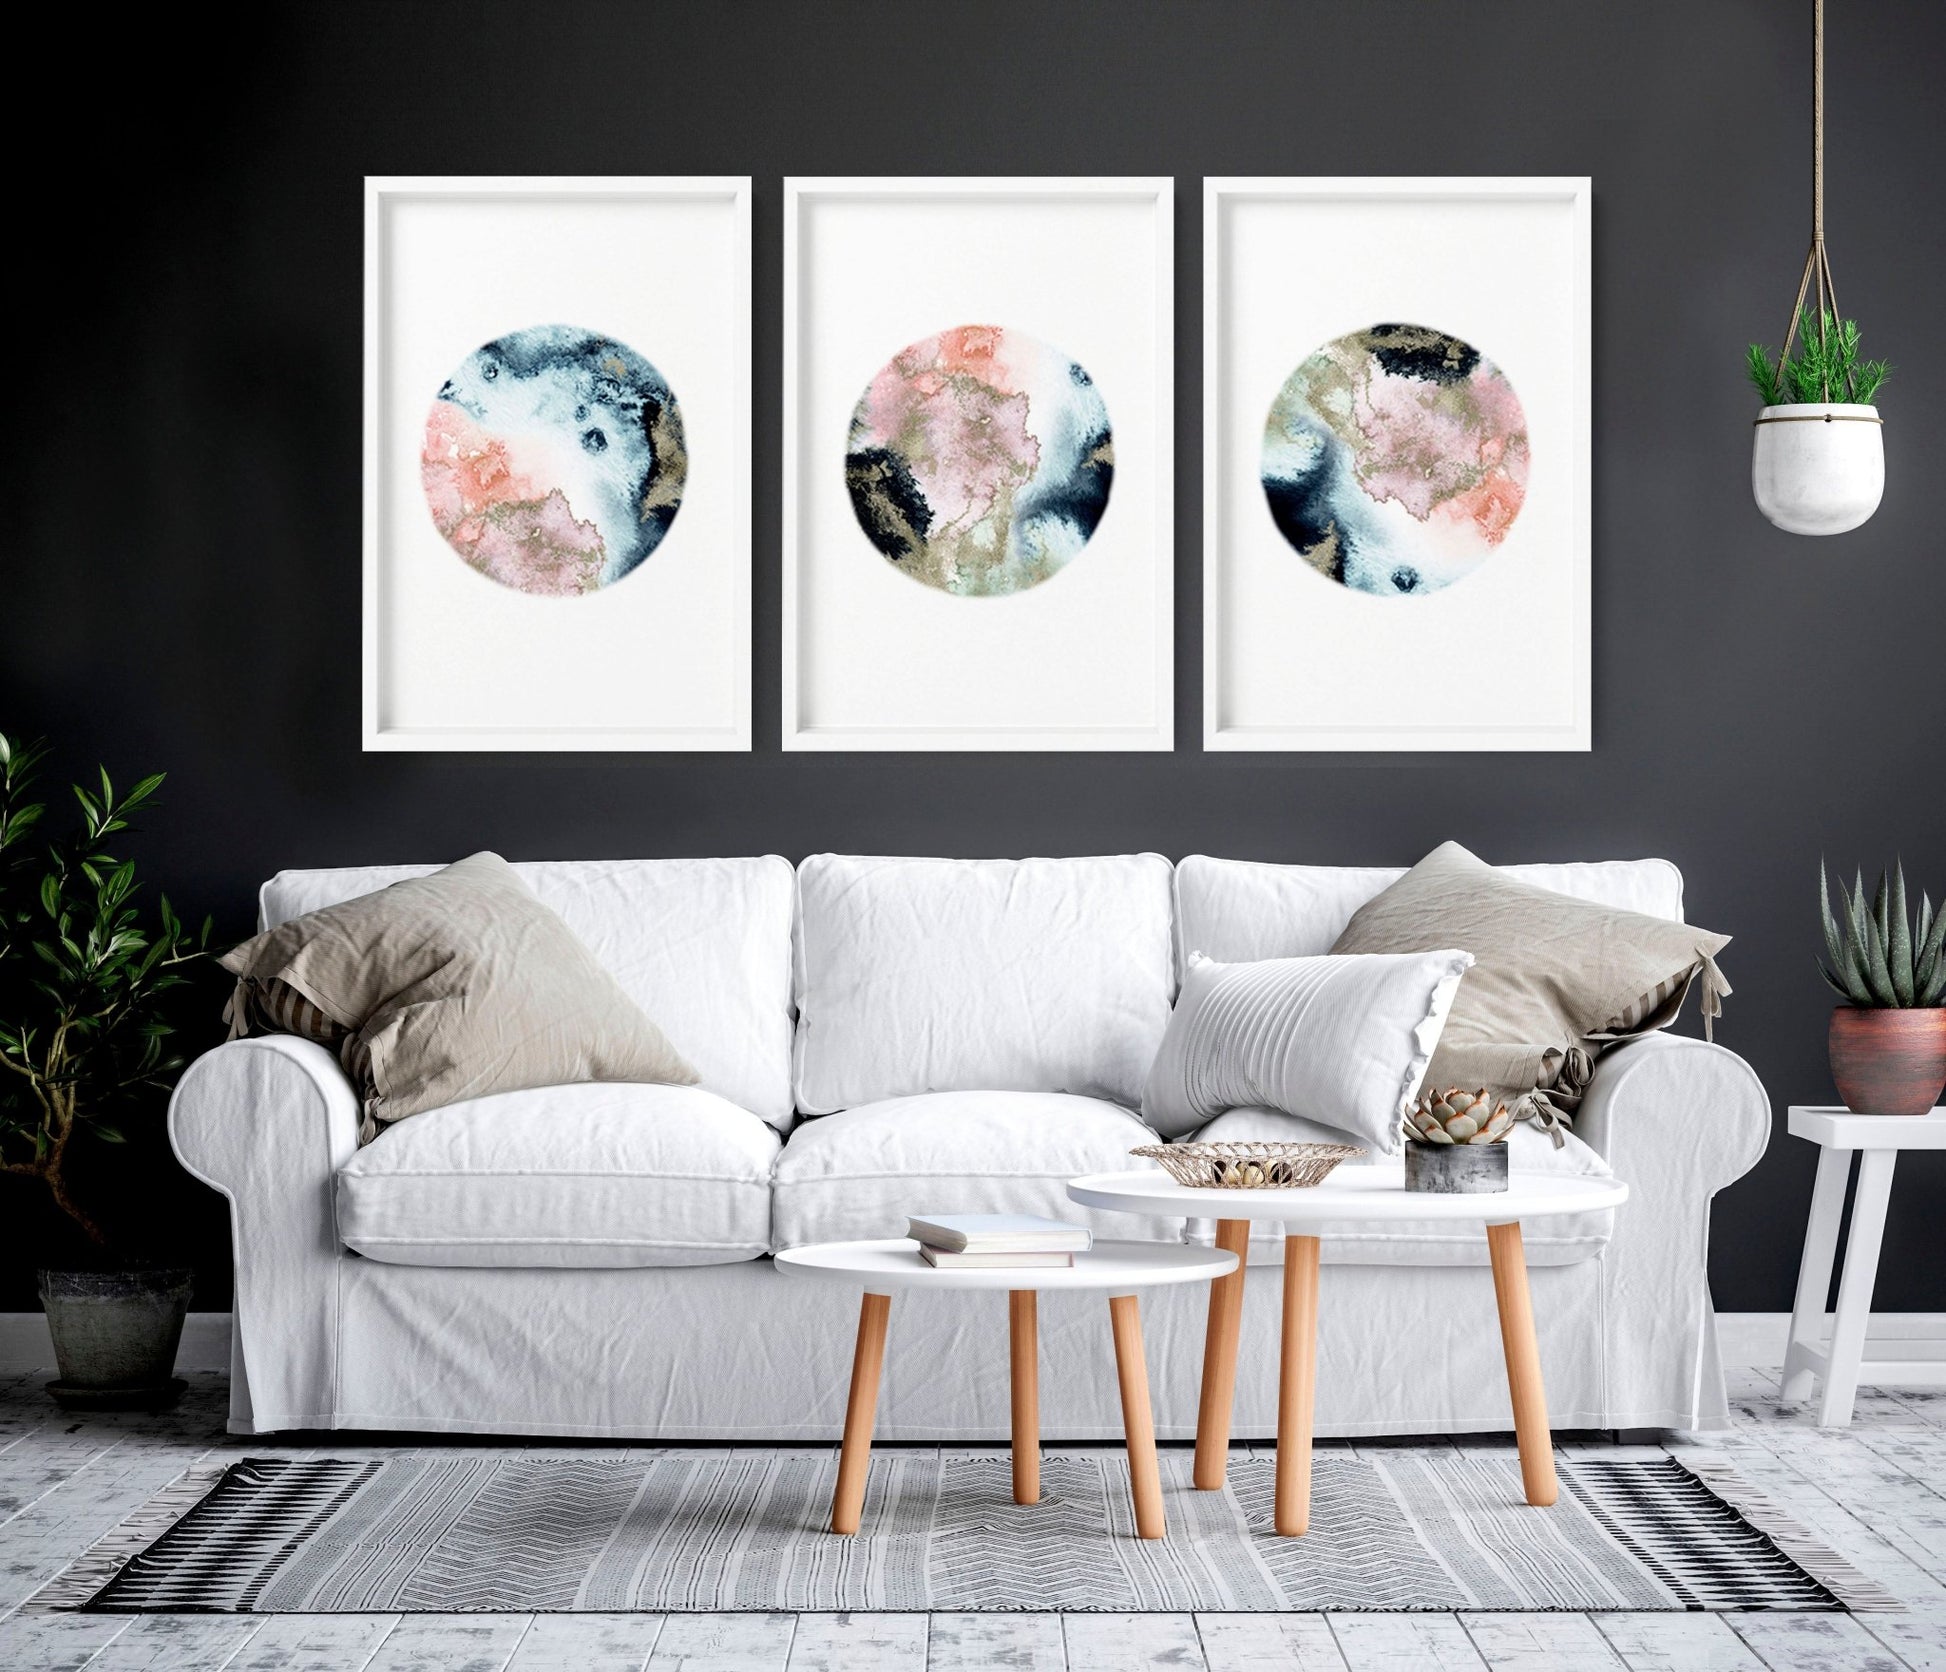 Moon wall art for living room | set of 3 wall art prints - About Wall Art